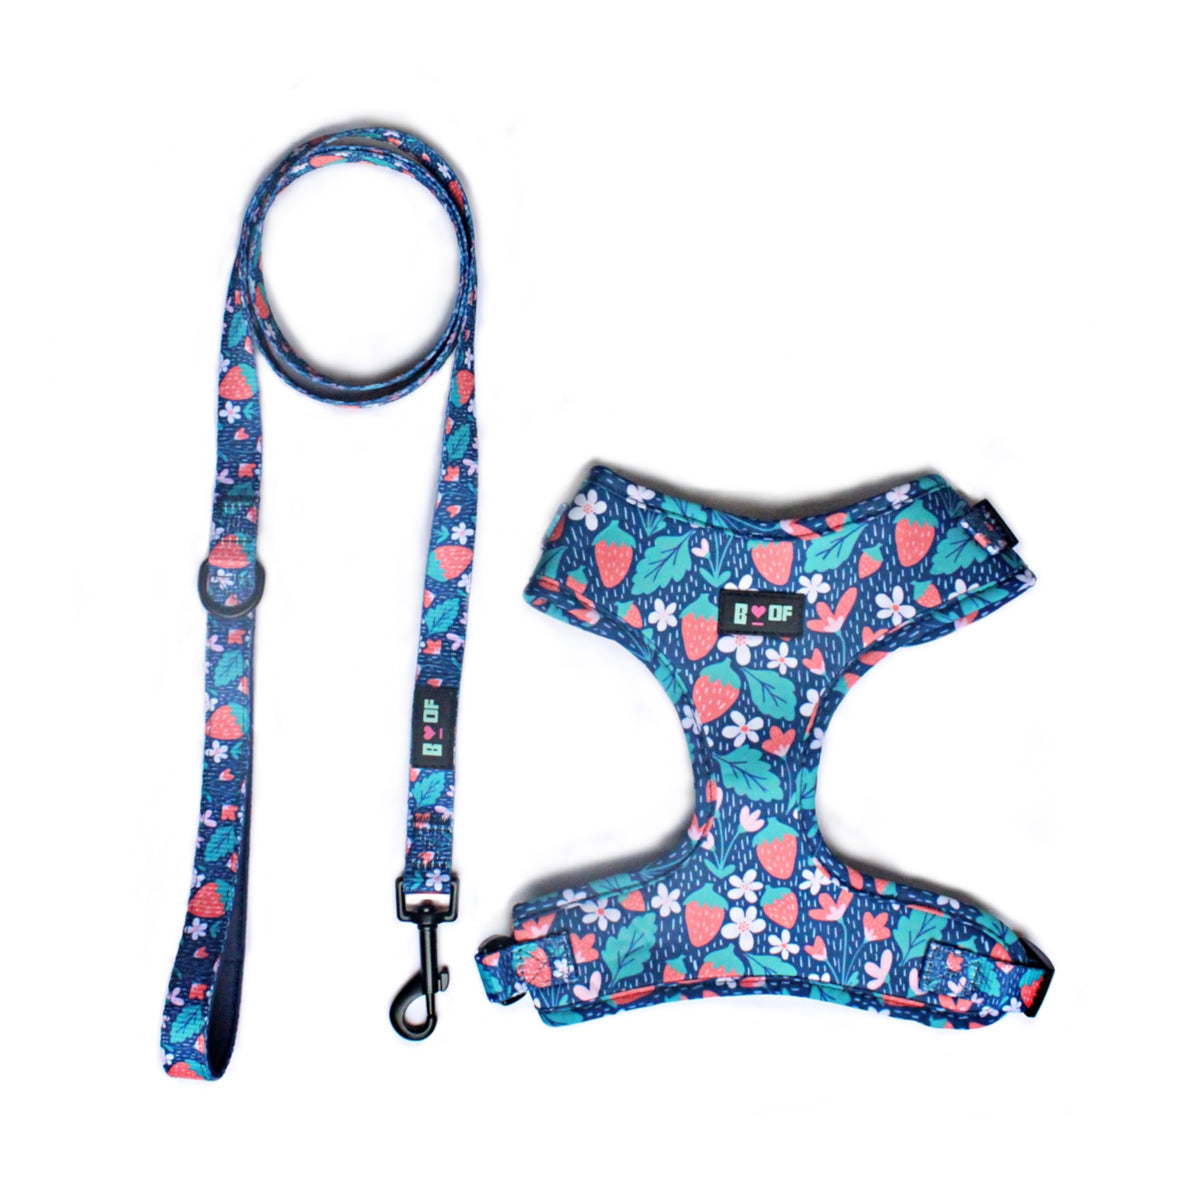 YOU’RE BERRY SPECIAL HARNESS AND LEASH